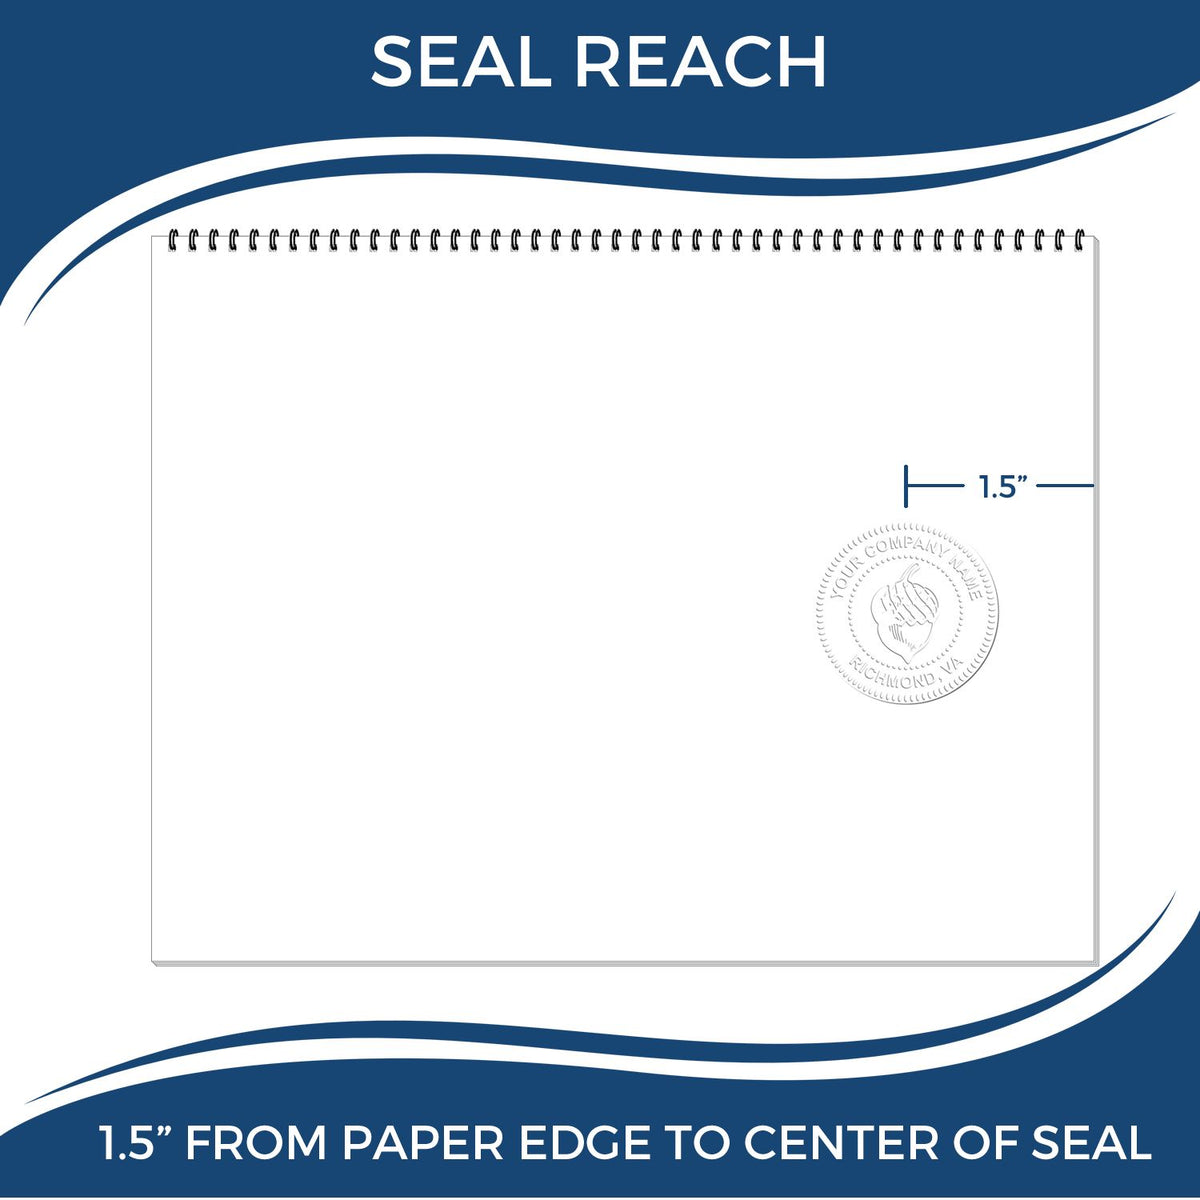 An infographic showing the seal reach which is represented by a ruler and a miniature seal image of the Soft Pocket Michigan Landscape Architect Embosser